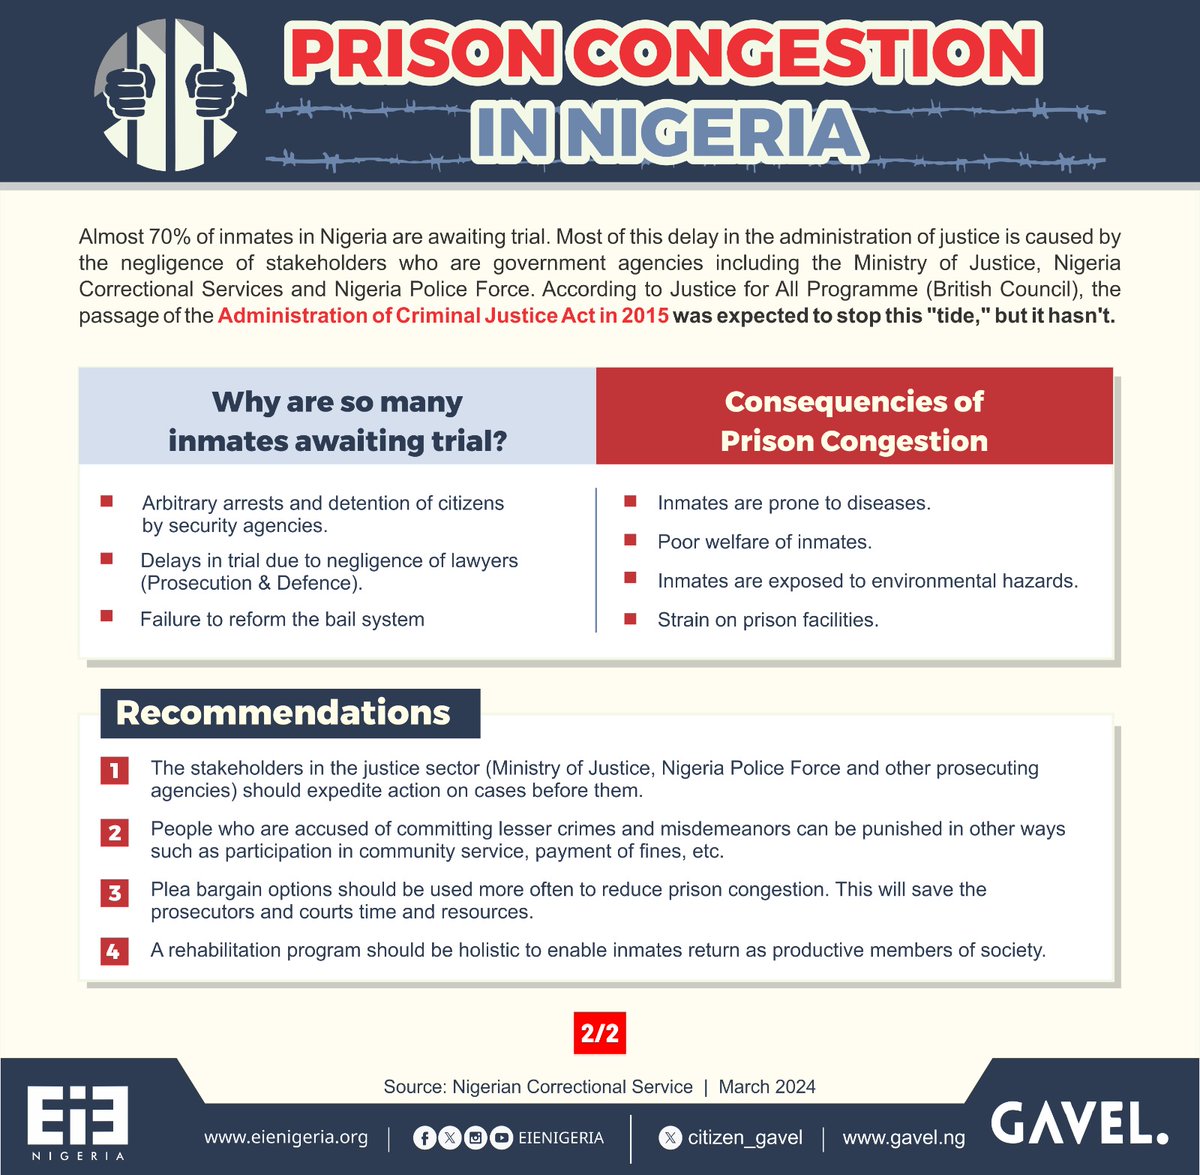 We echo the call for @CorrectionsNg and authorities to ensure public safety. It's time to surgically address the root causes through our proposed #PrisonReforms to uphold constitutional rights.